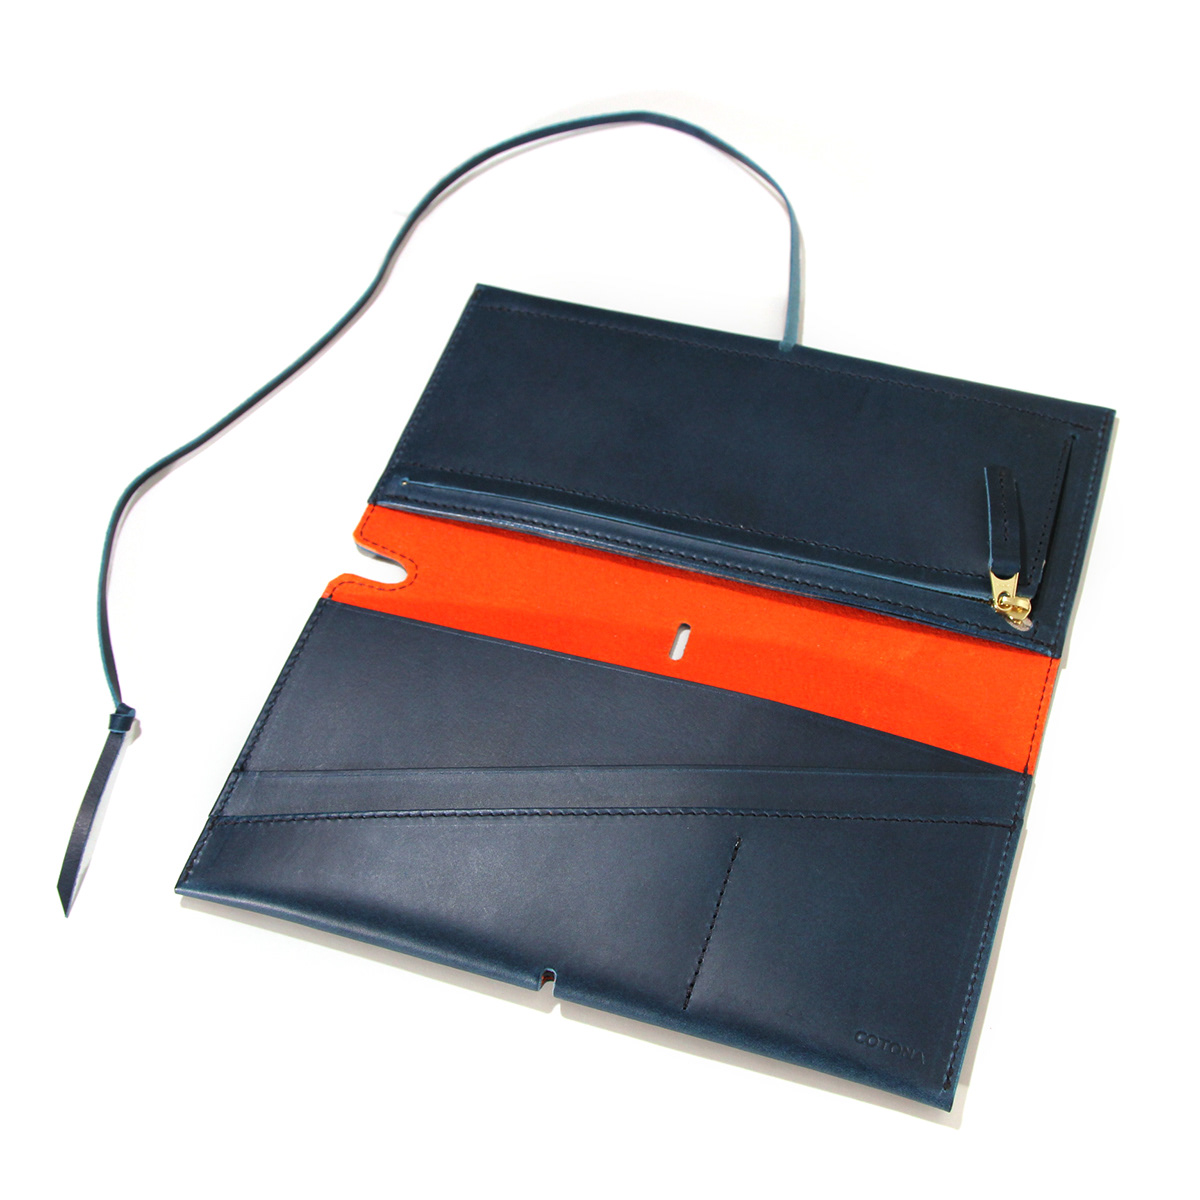 leather Passport design COTONA tokyo made in japan product color